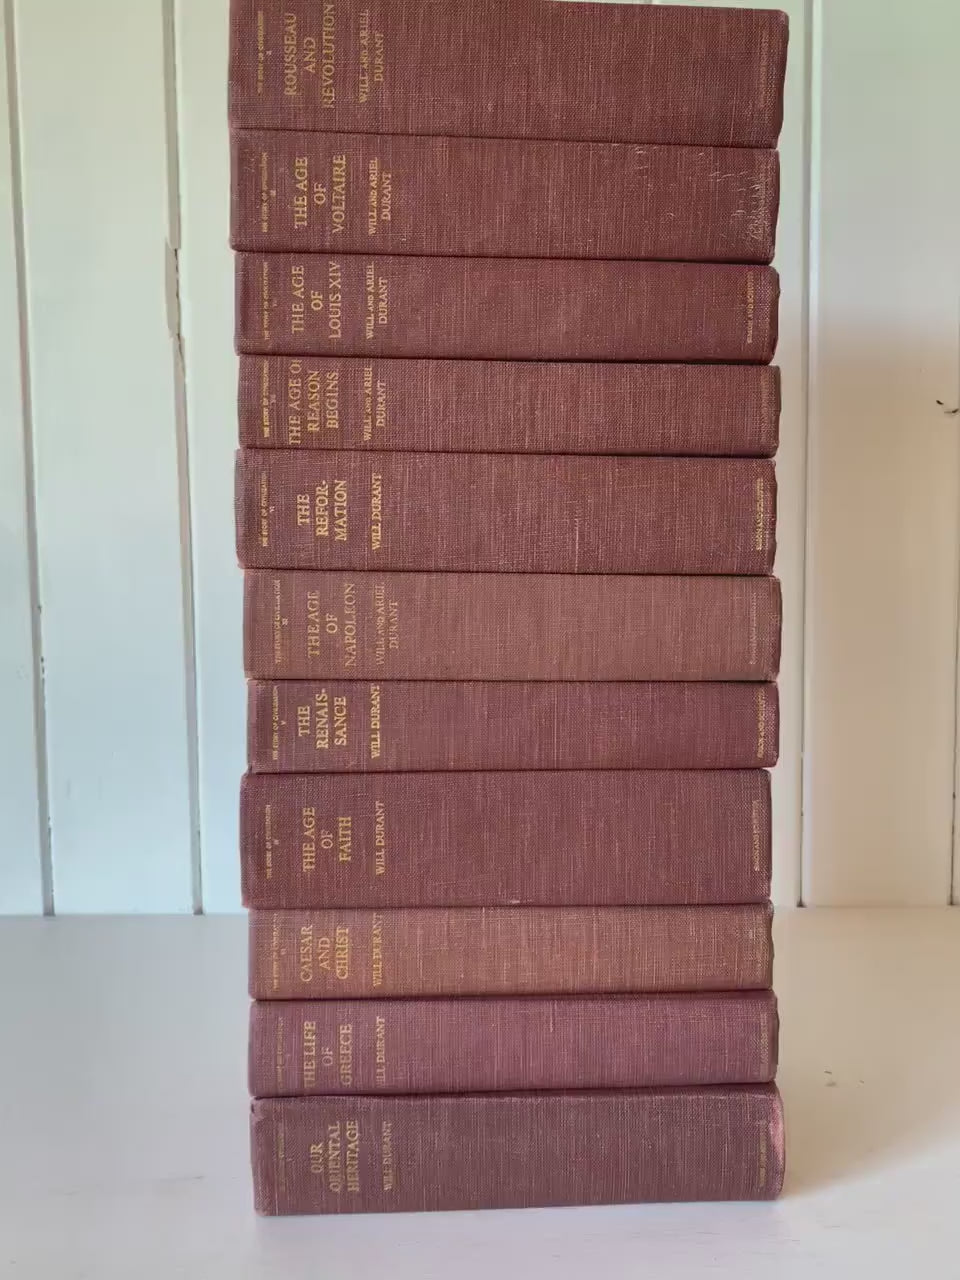 Vintage Story of Civilization, Will and Ariel Durant, Red Decorative Book Set, 1963